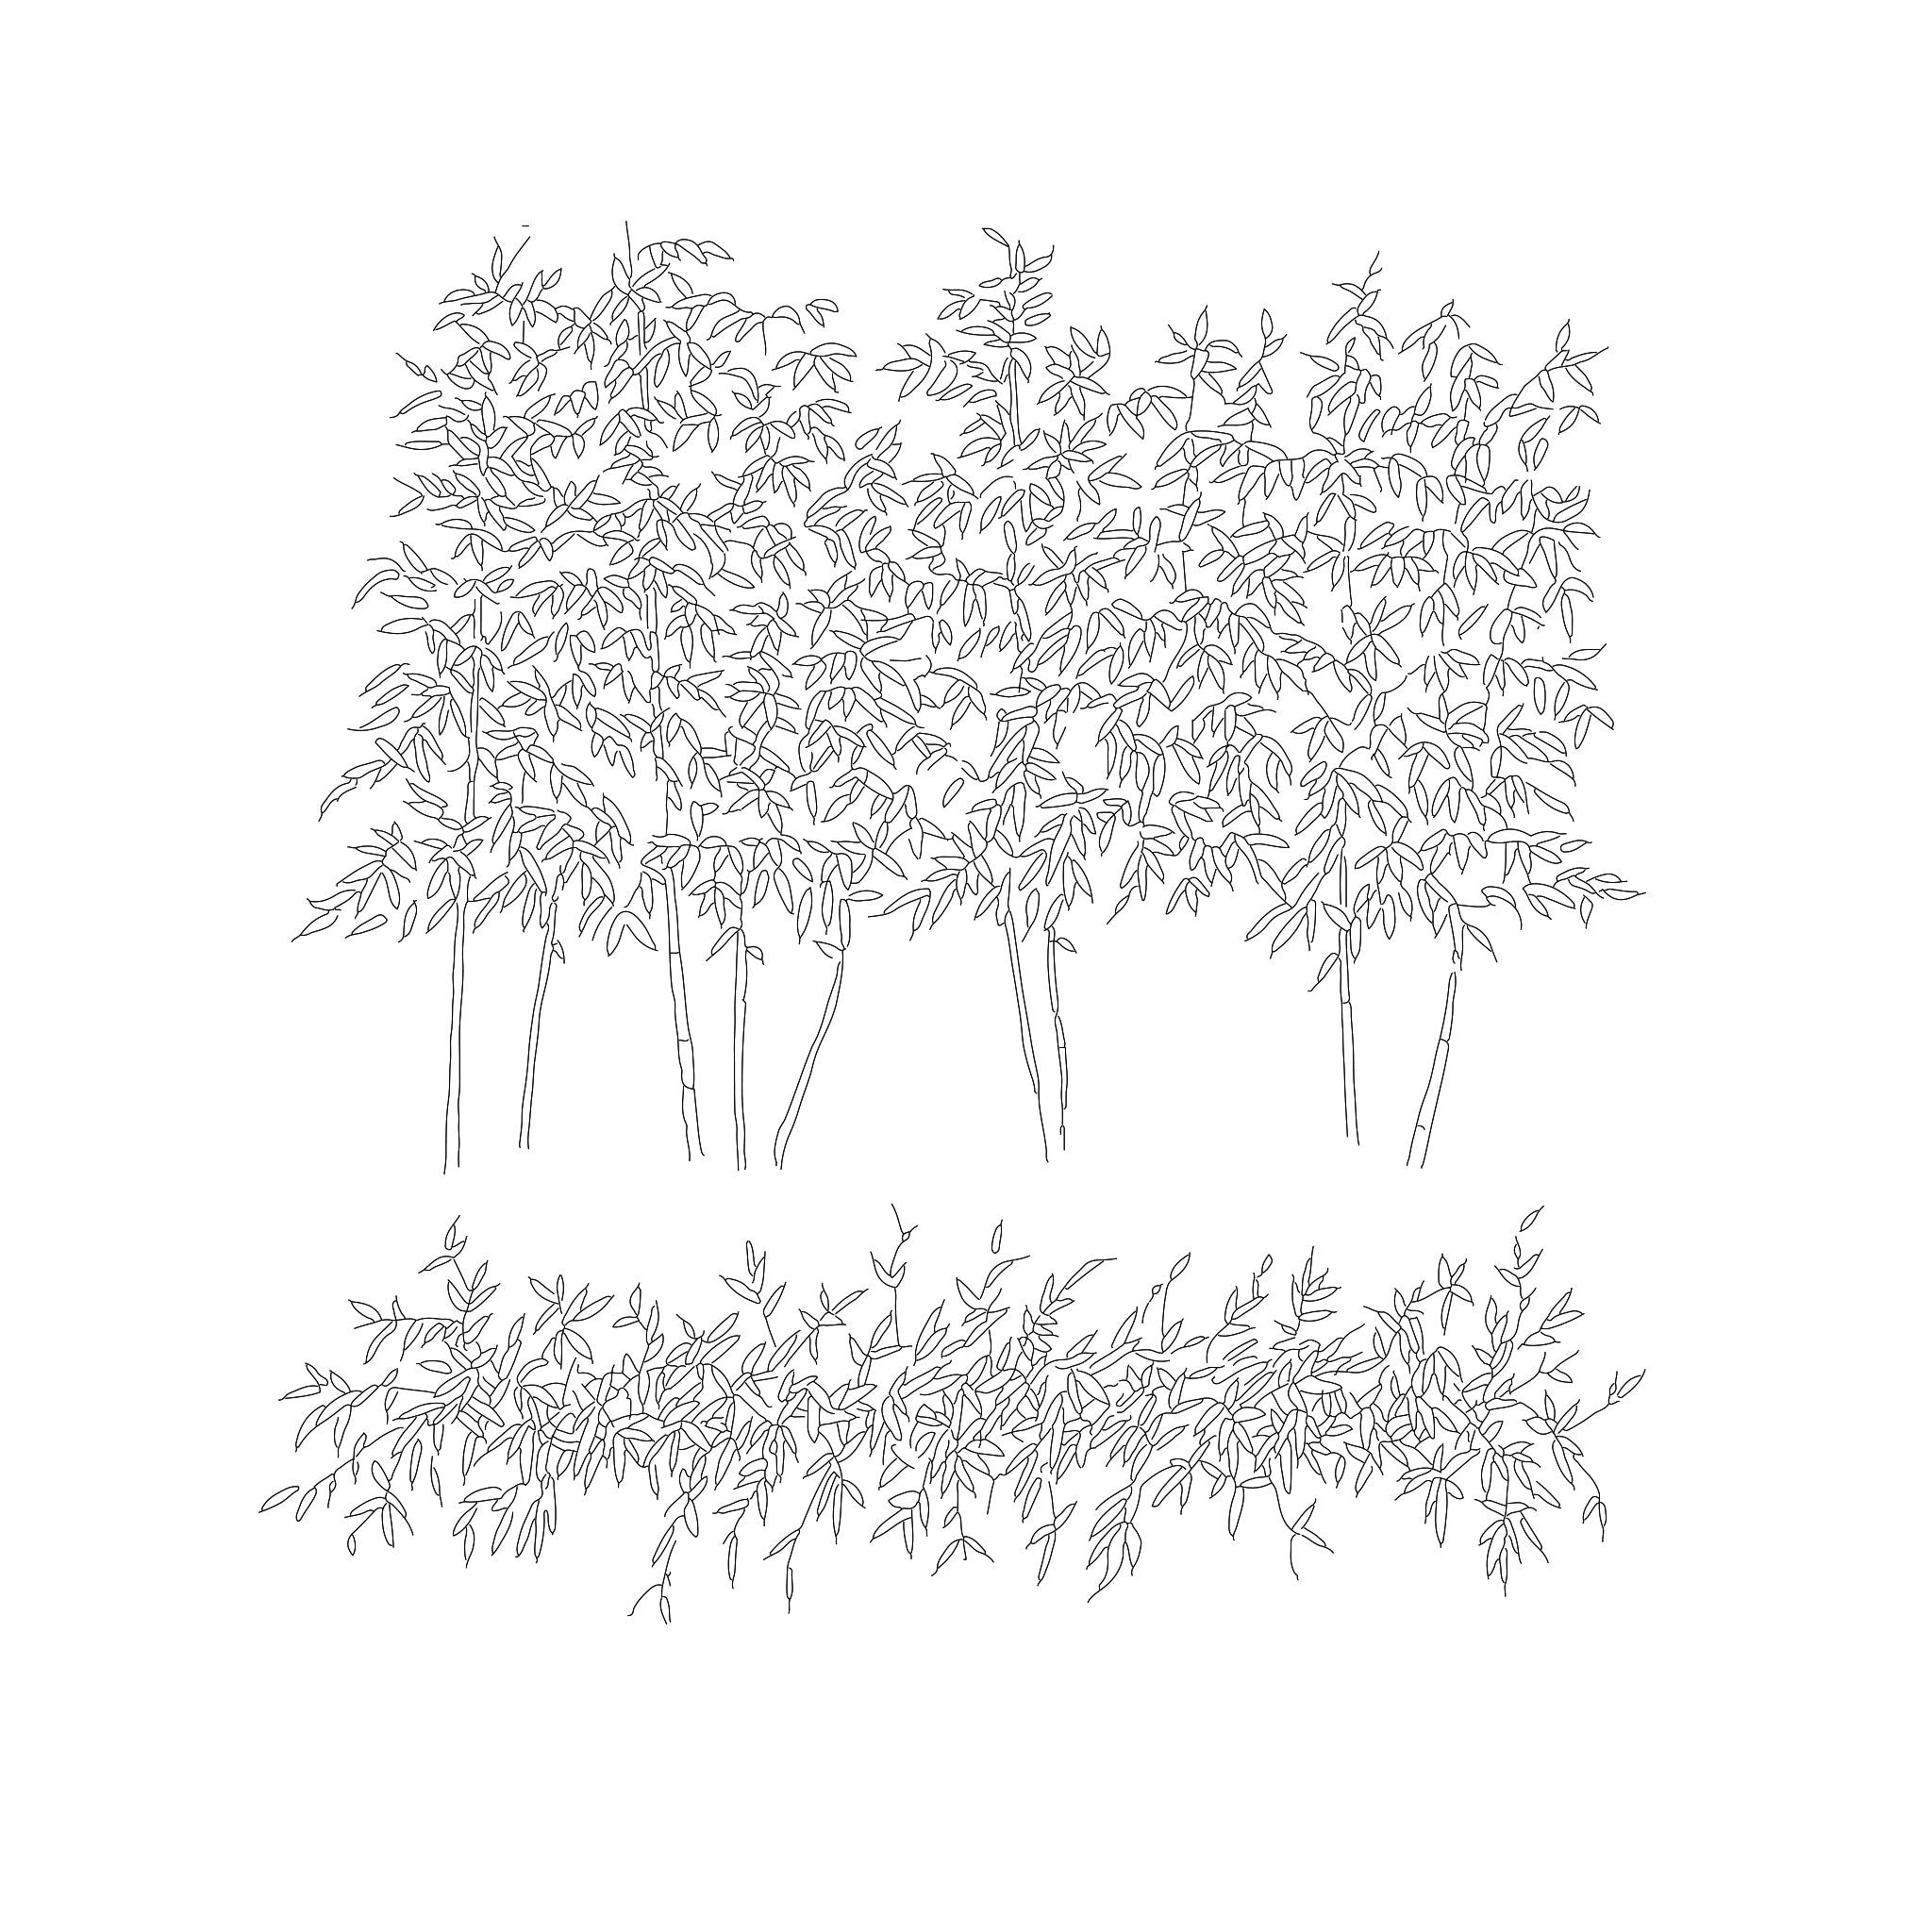 Tree Sketch Set Of Hand Drawn Architect Trees Sketch Architectural  Illustration Landscape Stock Illustration - Download Image Now - iStock